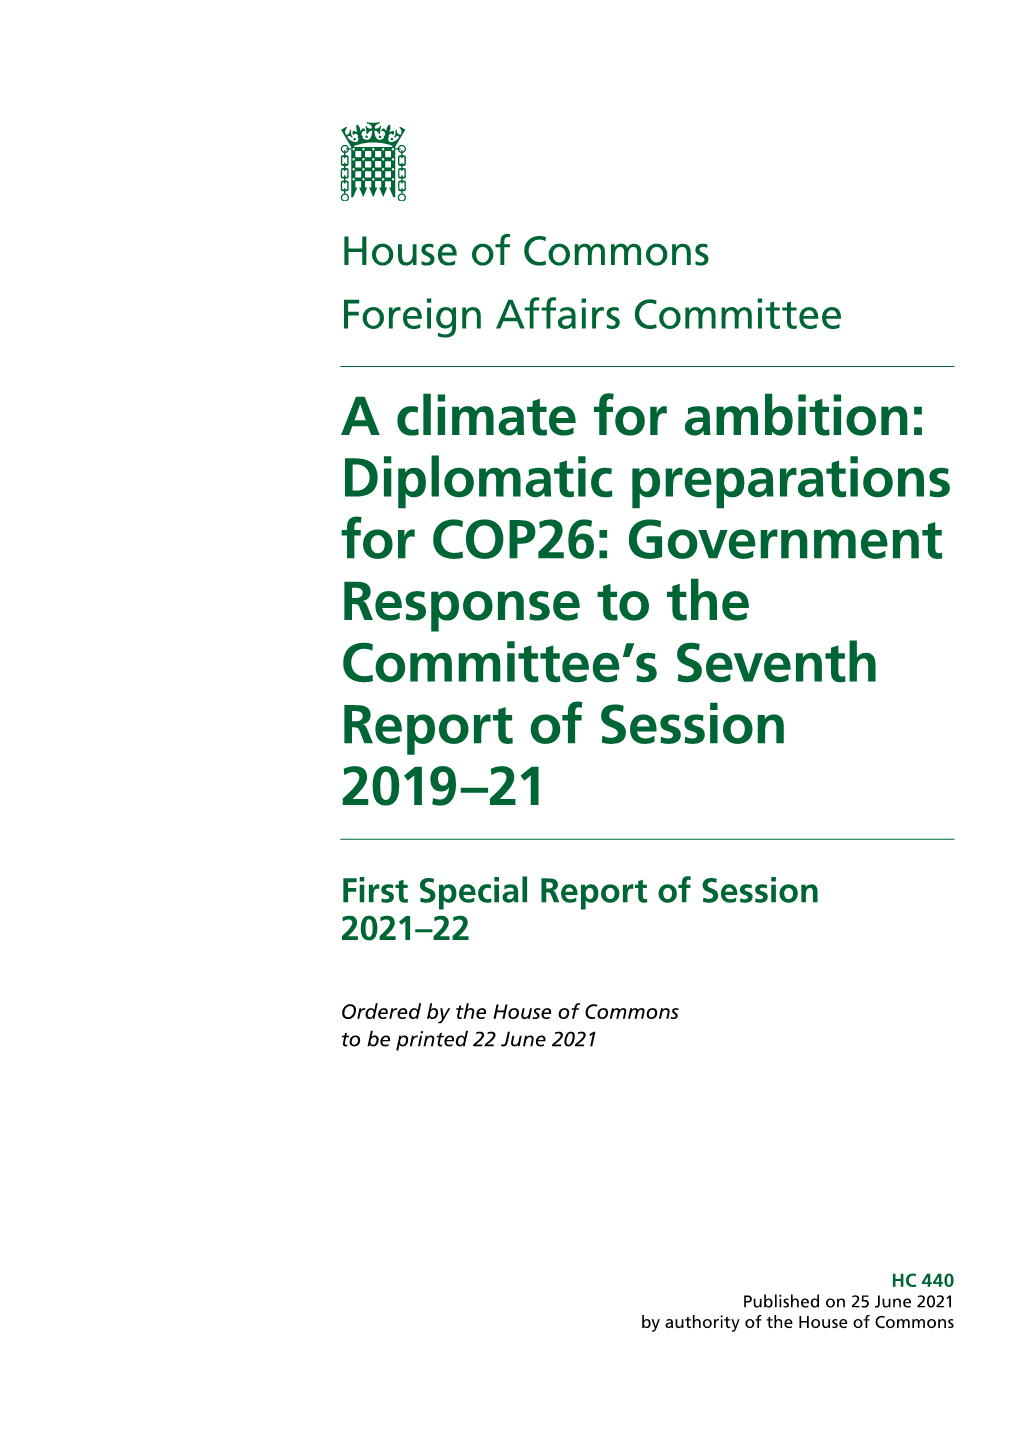 A Climate for Ambition: Diplomatic Preparations for COP26: Government Response to the Committee’S Seventh Report of Session 2019–21